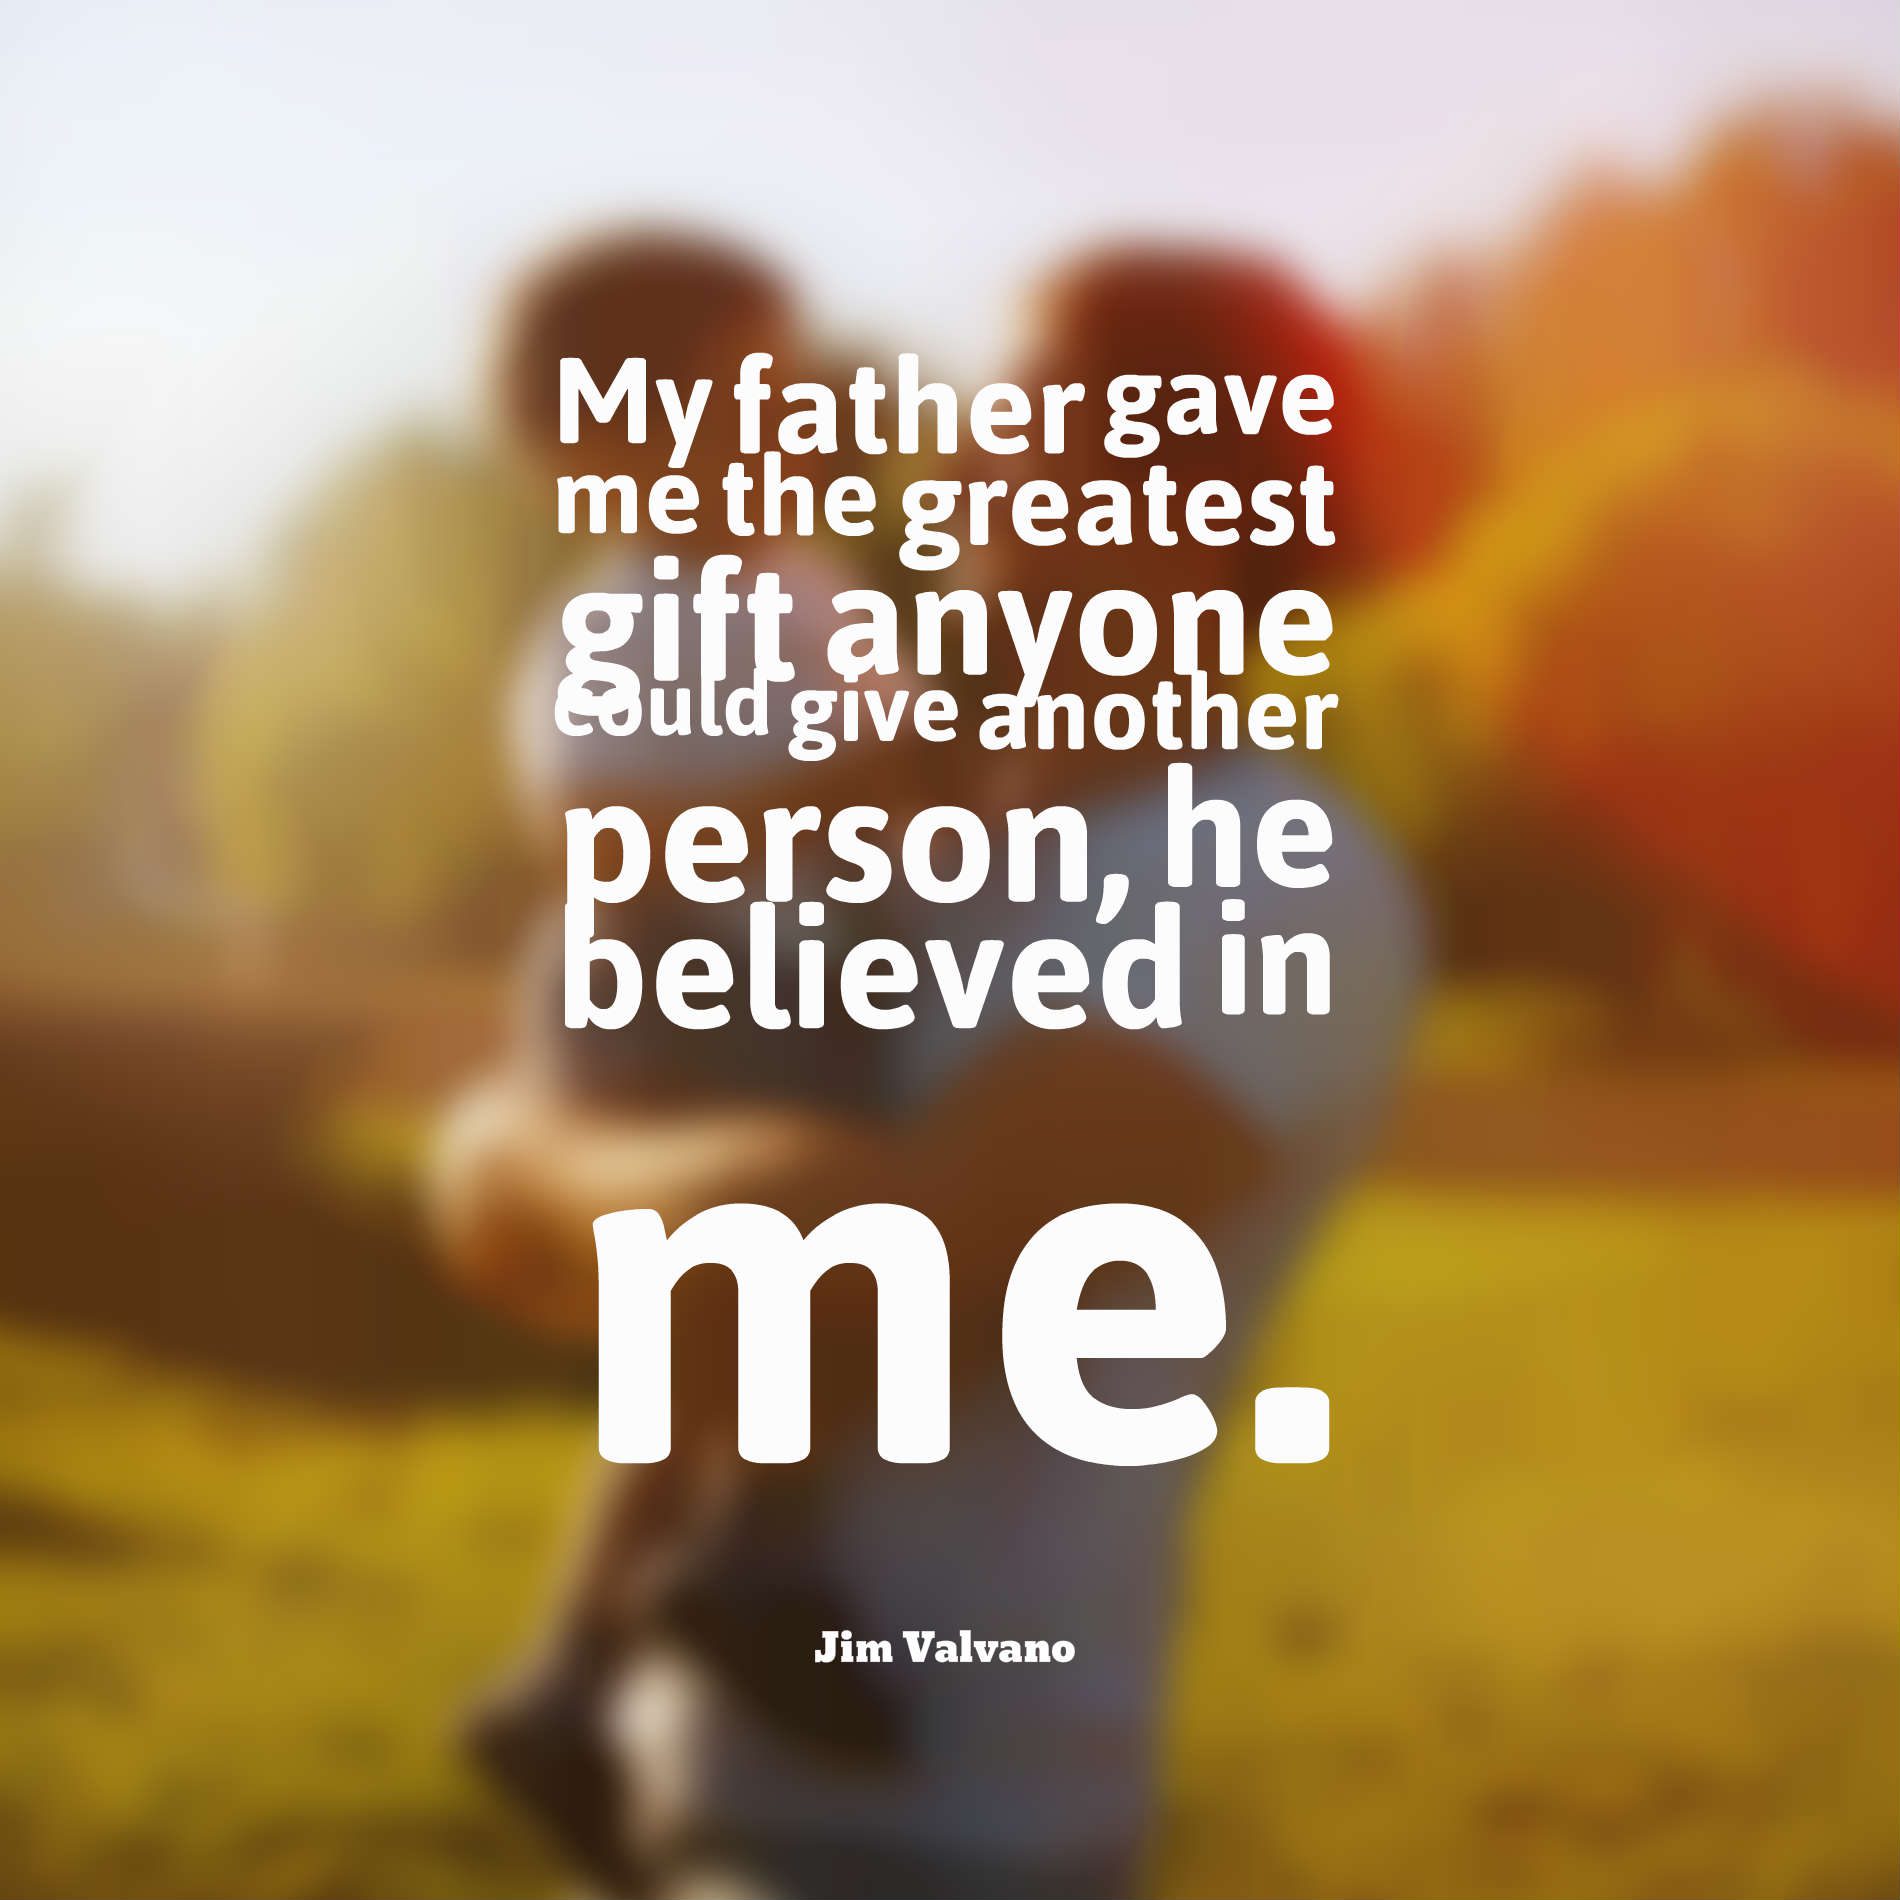 My father gave me the greatest gift anyone could give another person, he believed in me.